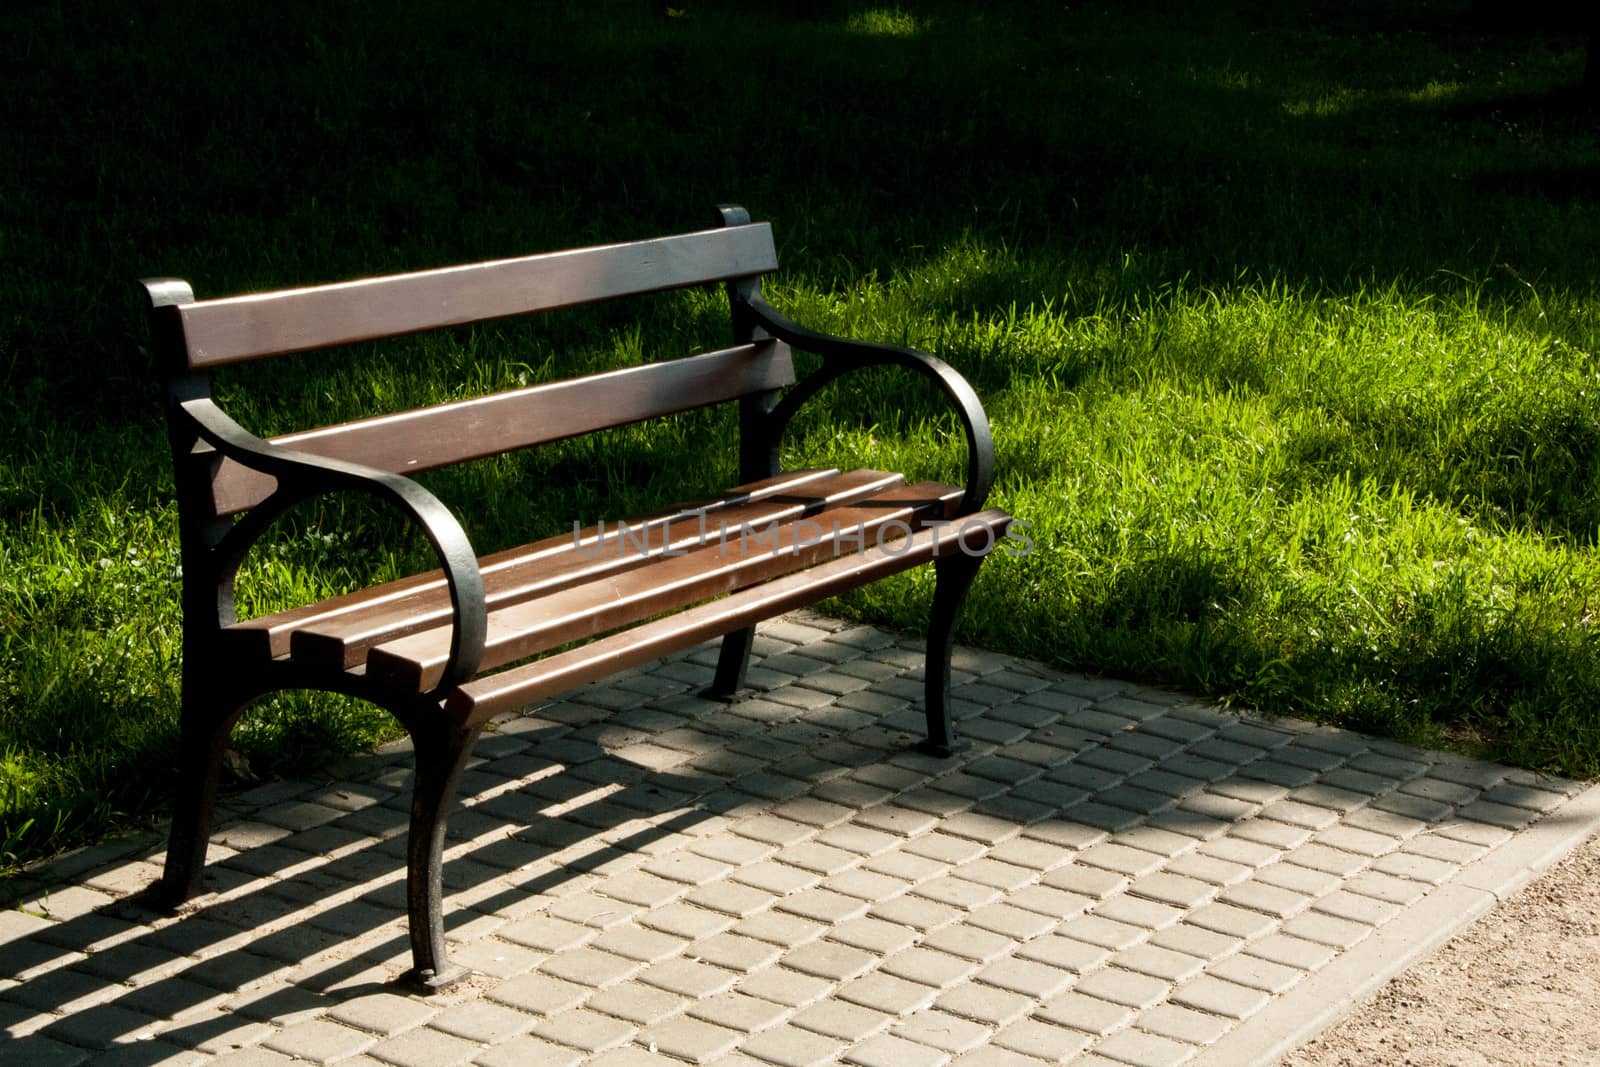 Stylish bench in the Park in Sunny summer day